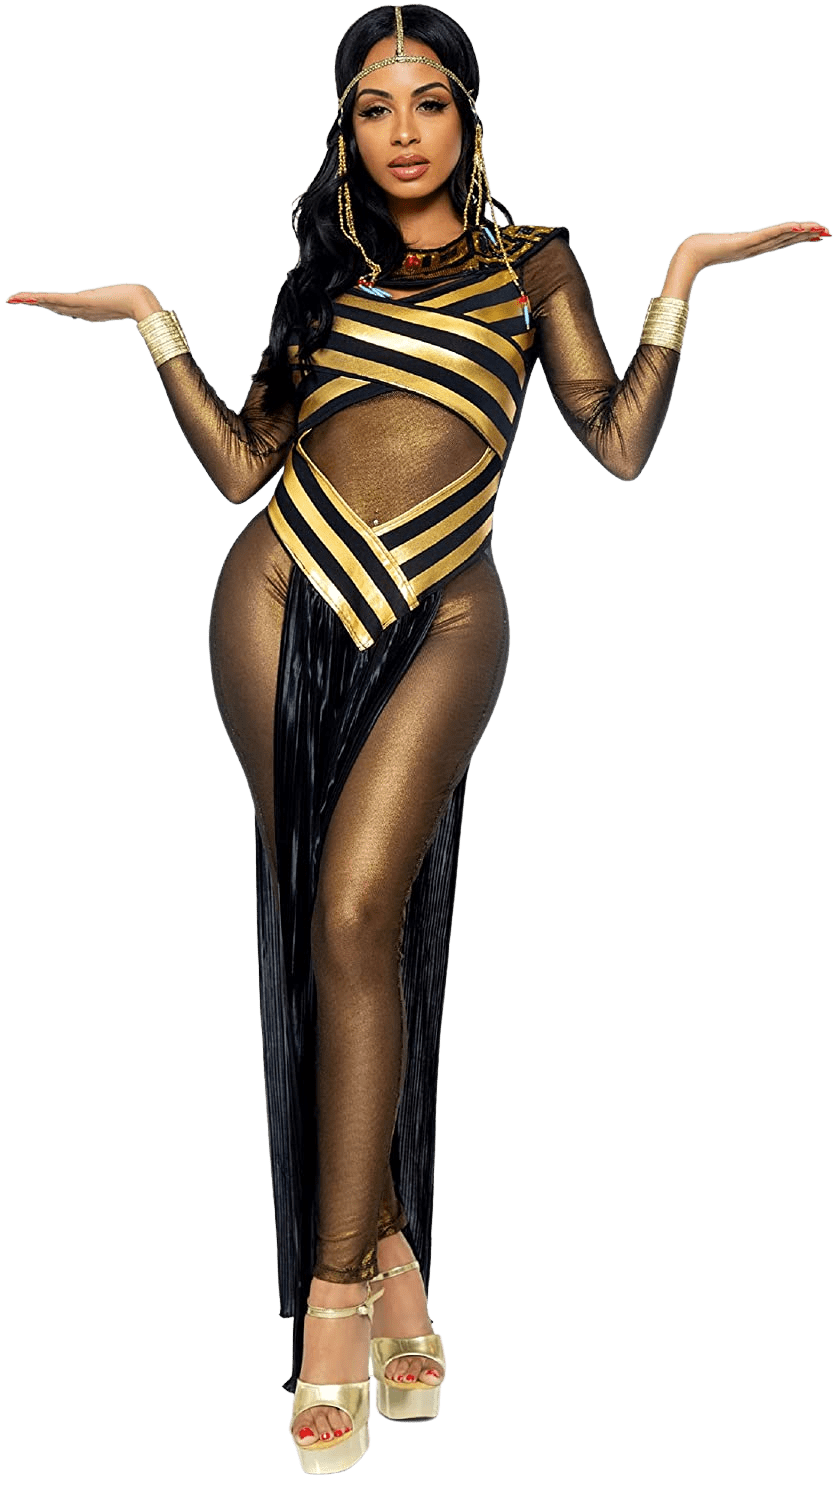 Leg Avenue Women's Queen Cleopatra Costume | Decor Gifts and More